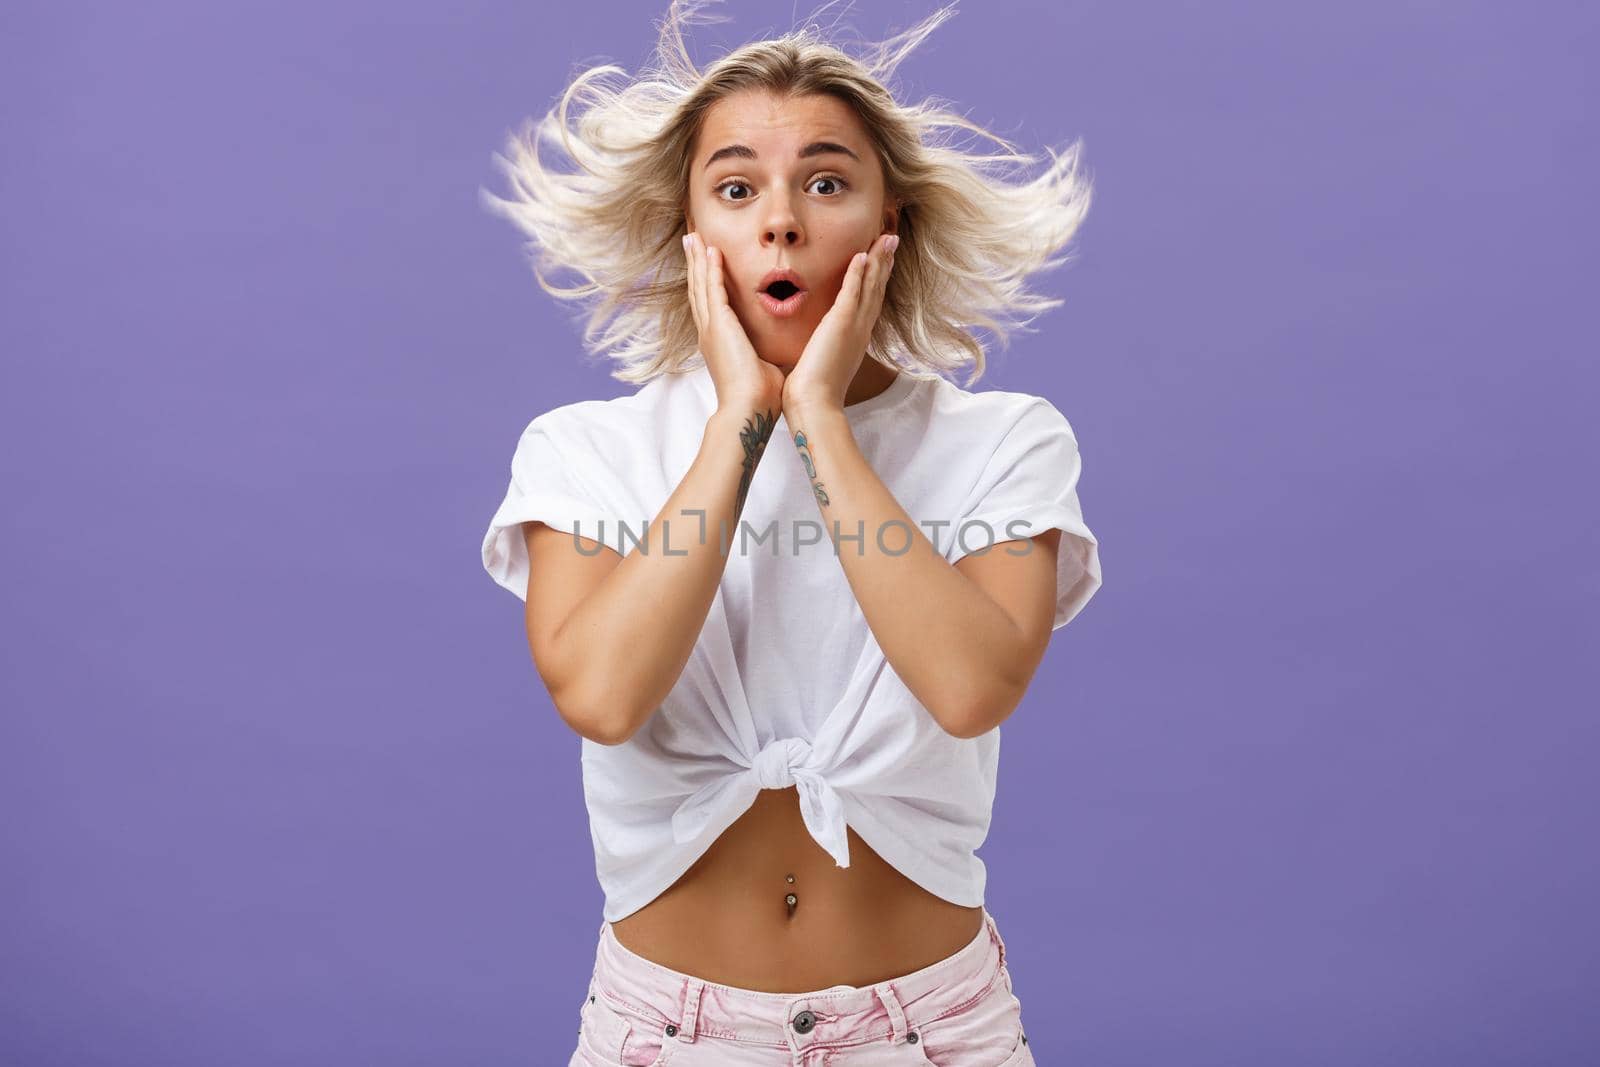 Lifestyle. Romantic surprised and thrilled feminine blonde female with tattoos standing on windy street folding lips and holding hands on face impressed and intrigued while hair floats in air over purple wall.